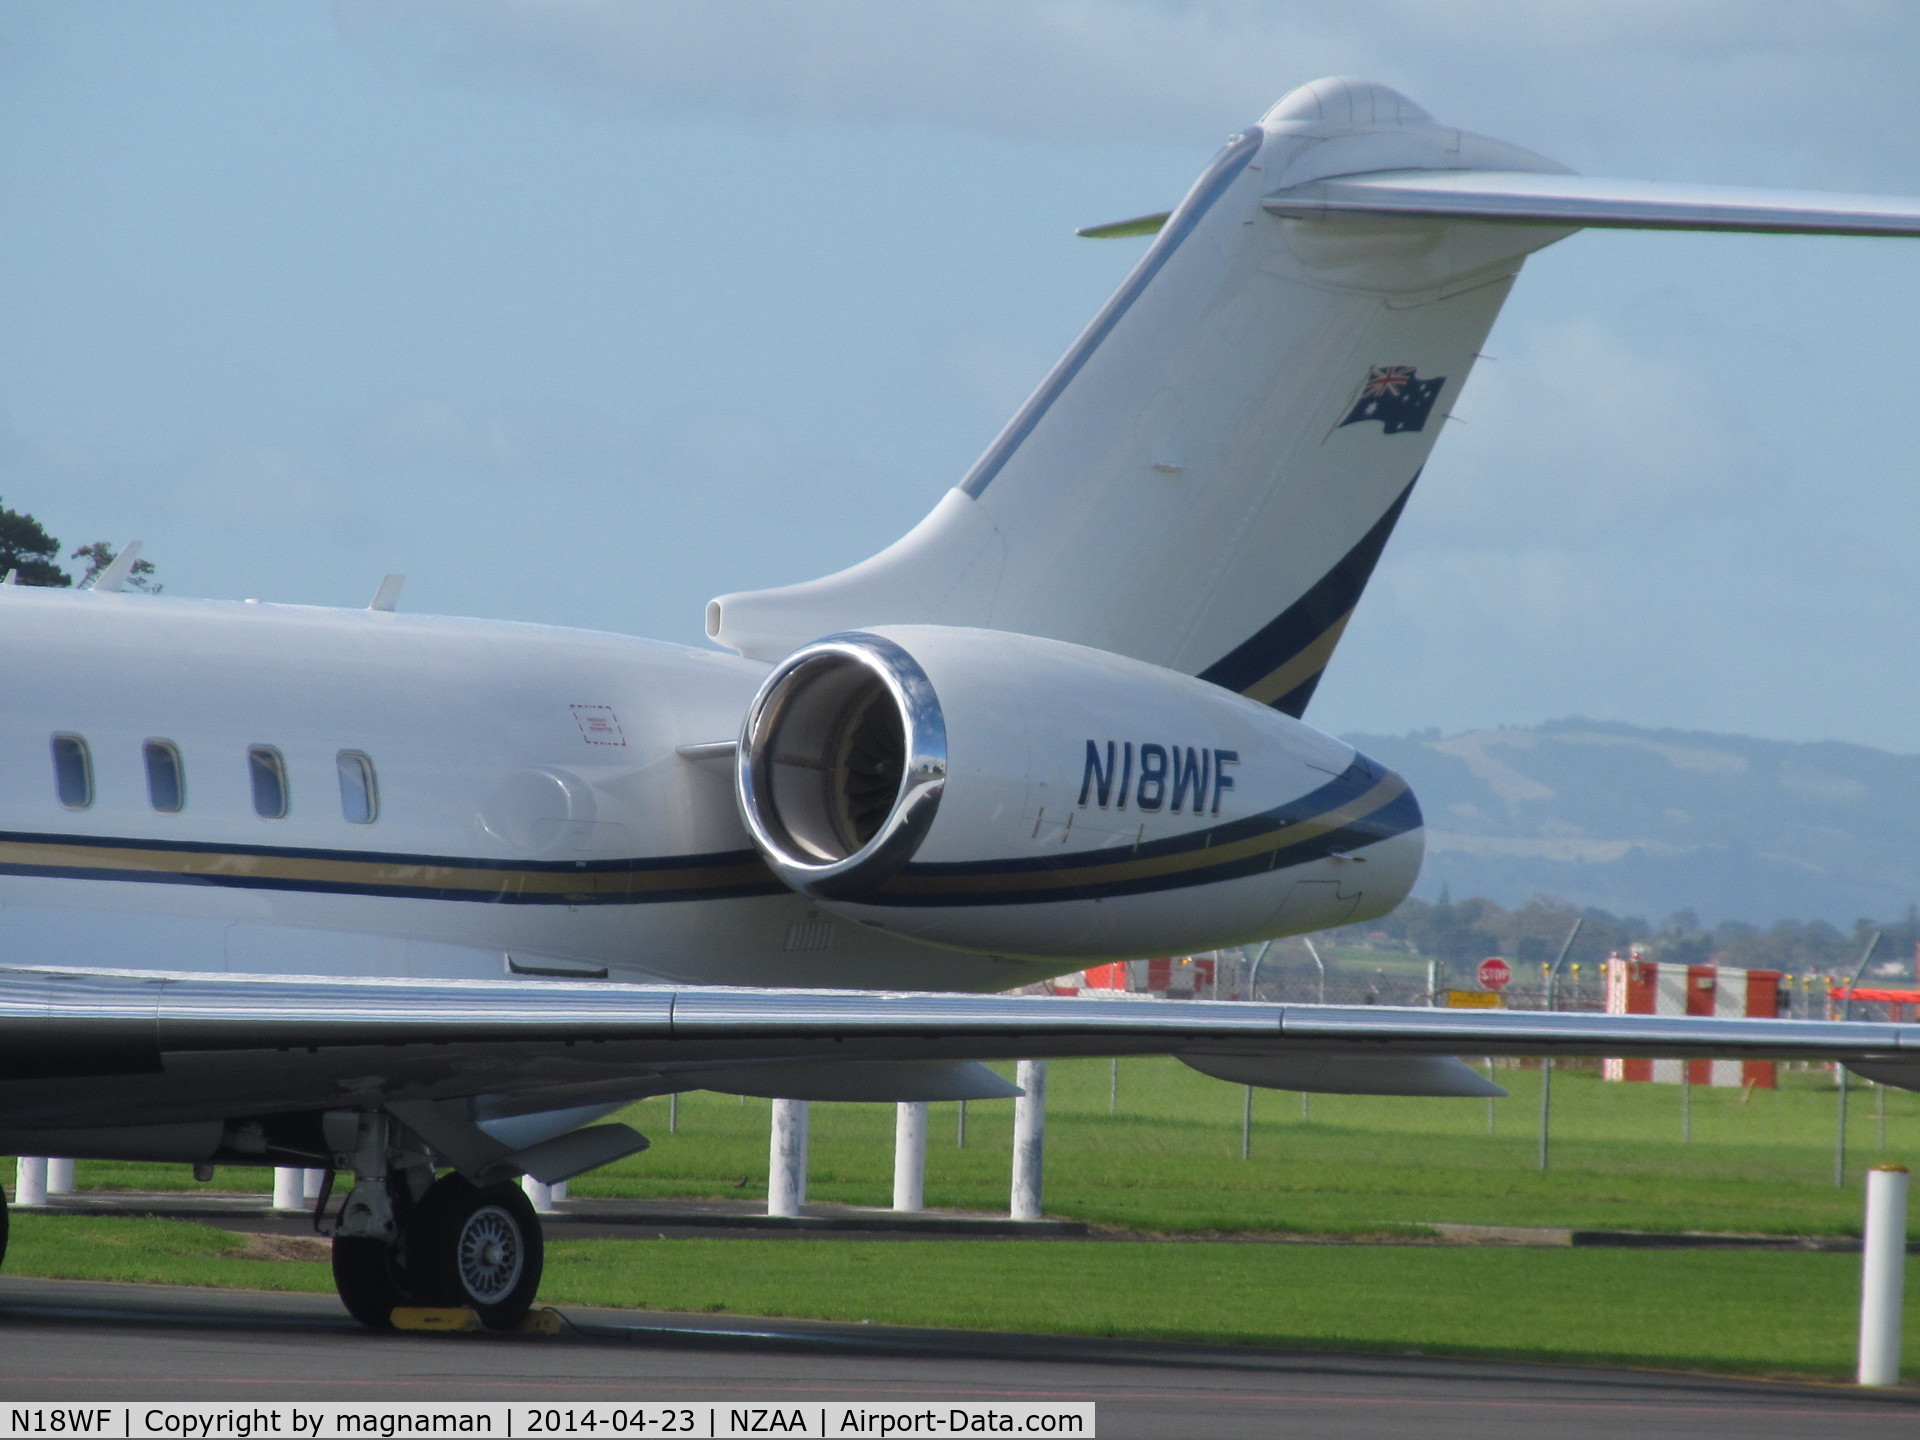 N18WF, 2006 Bombardier BD-700-1A10 Global Express XRS C/N 9215, Flag on tail gives away the residency in Oz